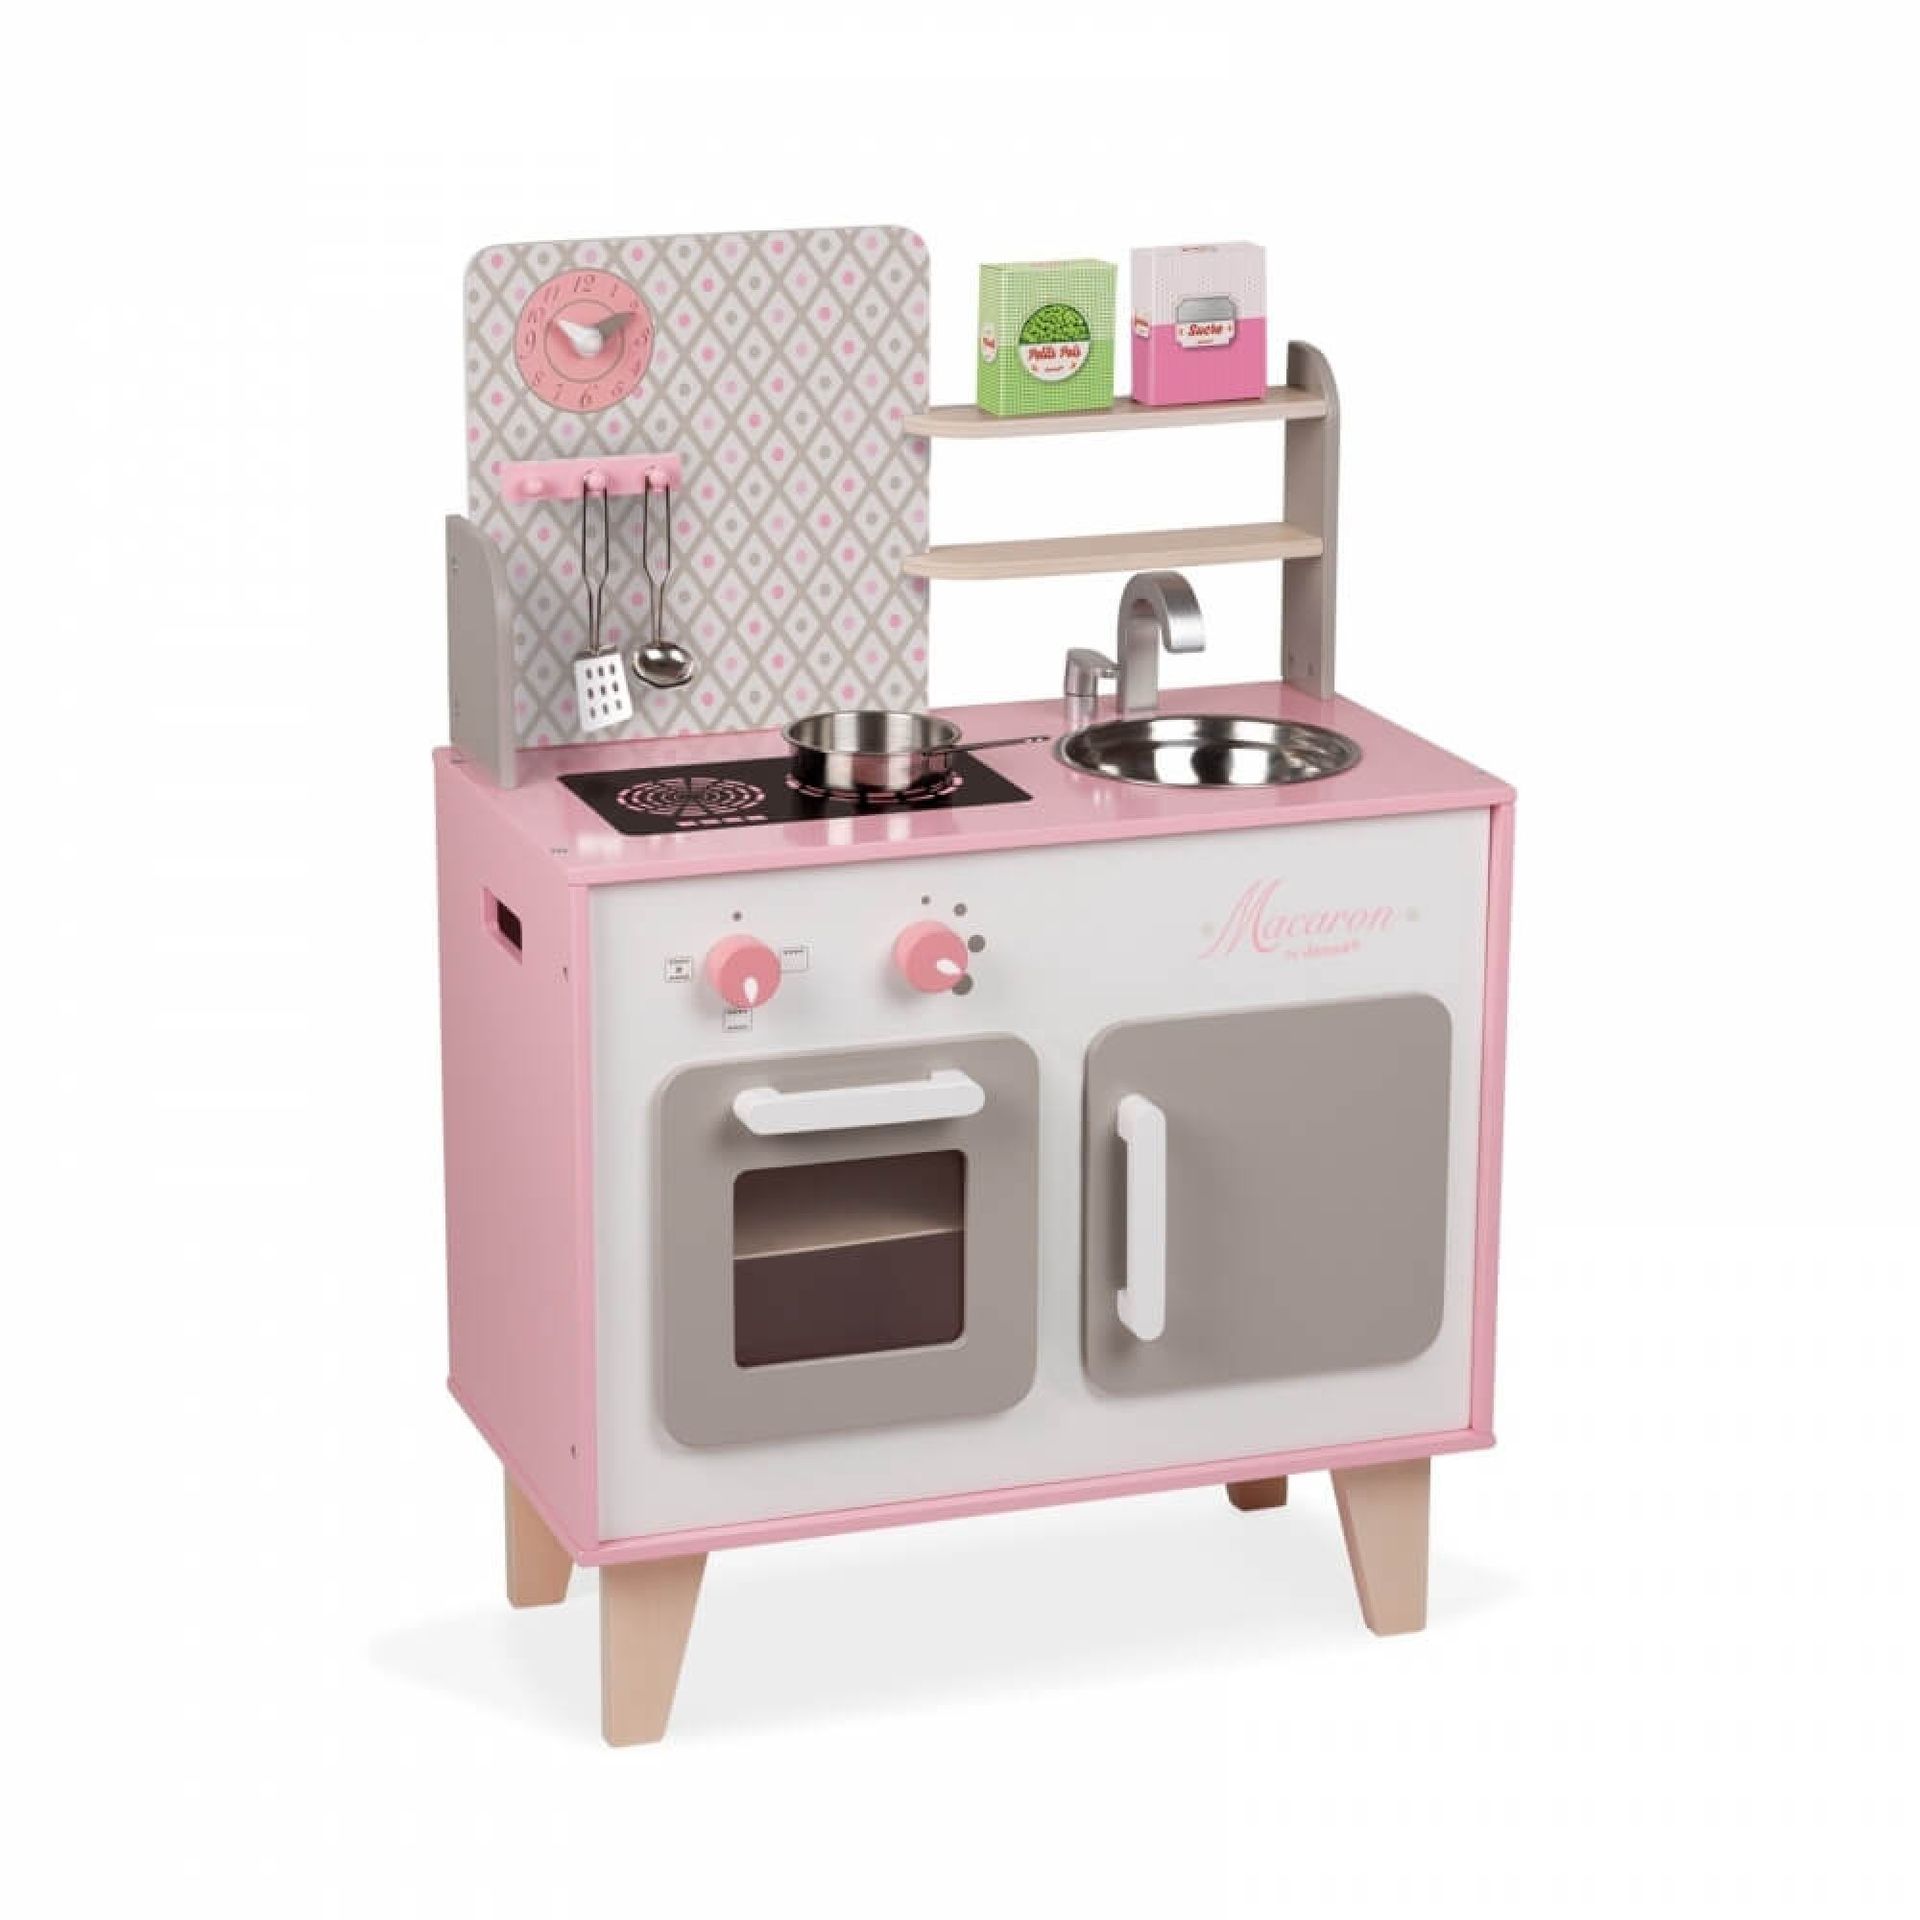 Null Wooden children's kitchen Macaron Janod J06567 - 3/8 years - sold new with &hellip;